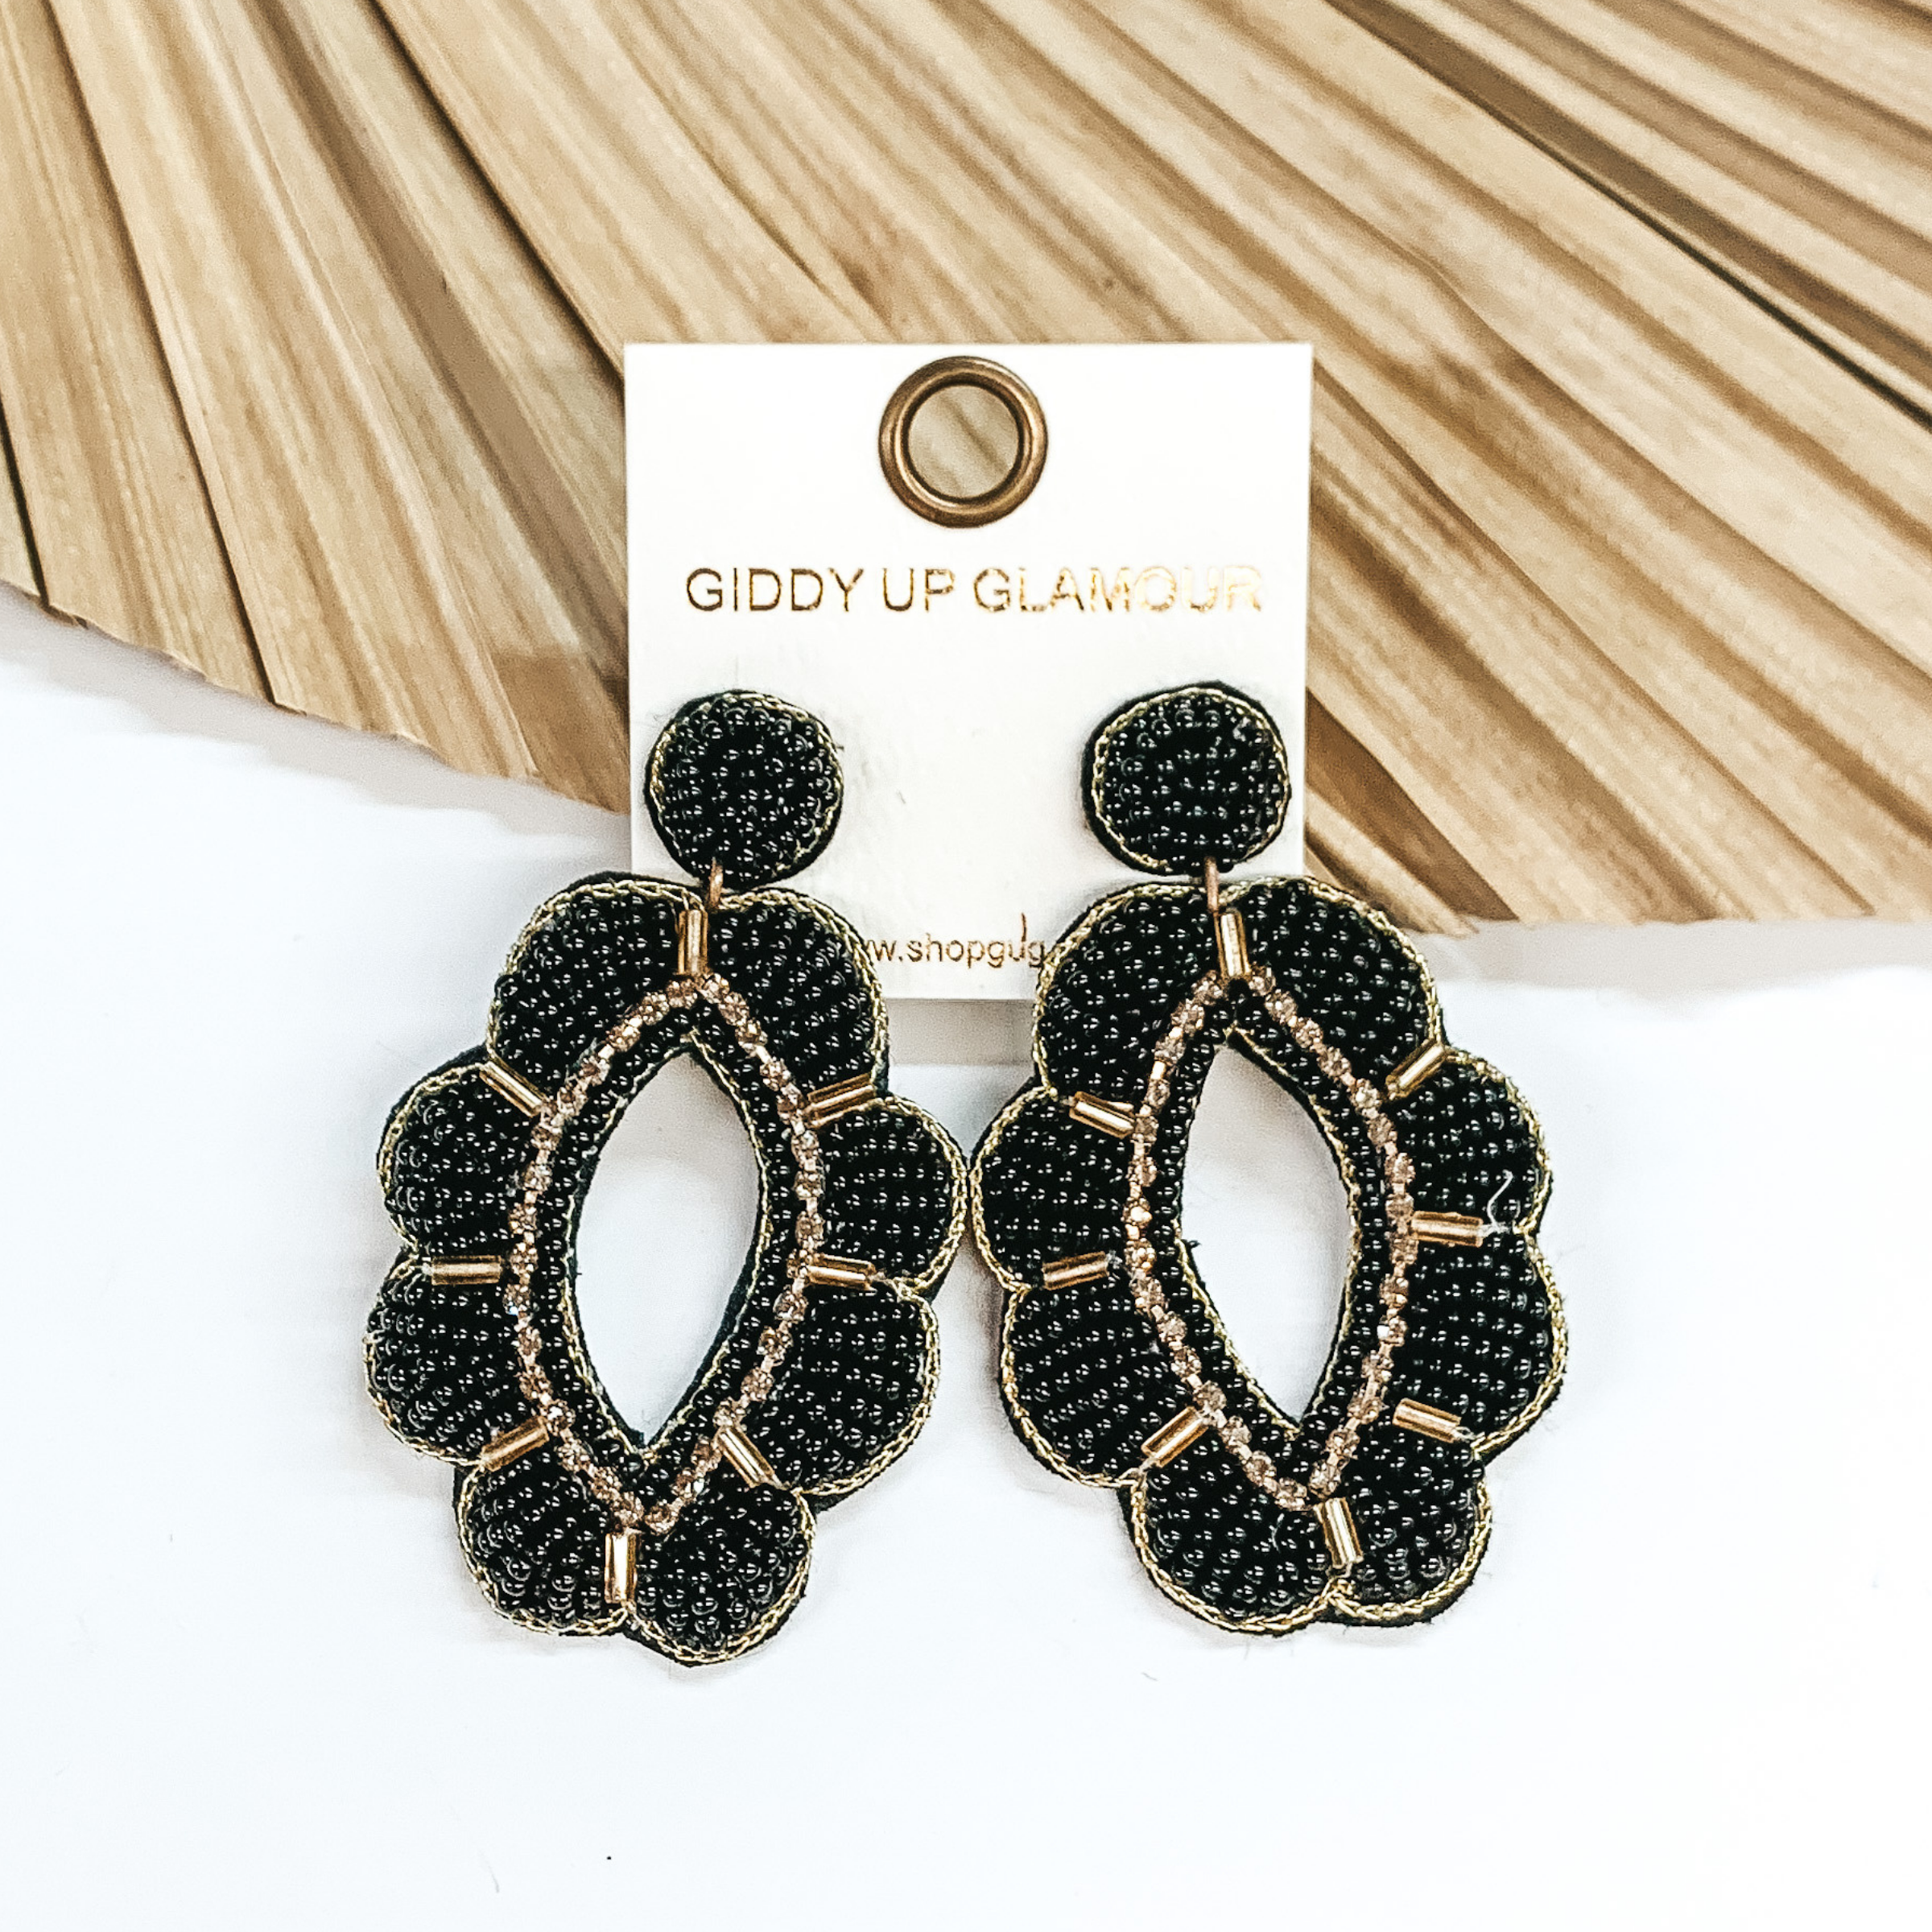 Black beaded earrings in a floral teardrop shape  with gold outline. Long gold beads in between  each petal with gold, shiny beads around in the middle. Taken in a white background with a light brown decor piece.